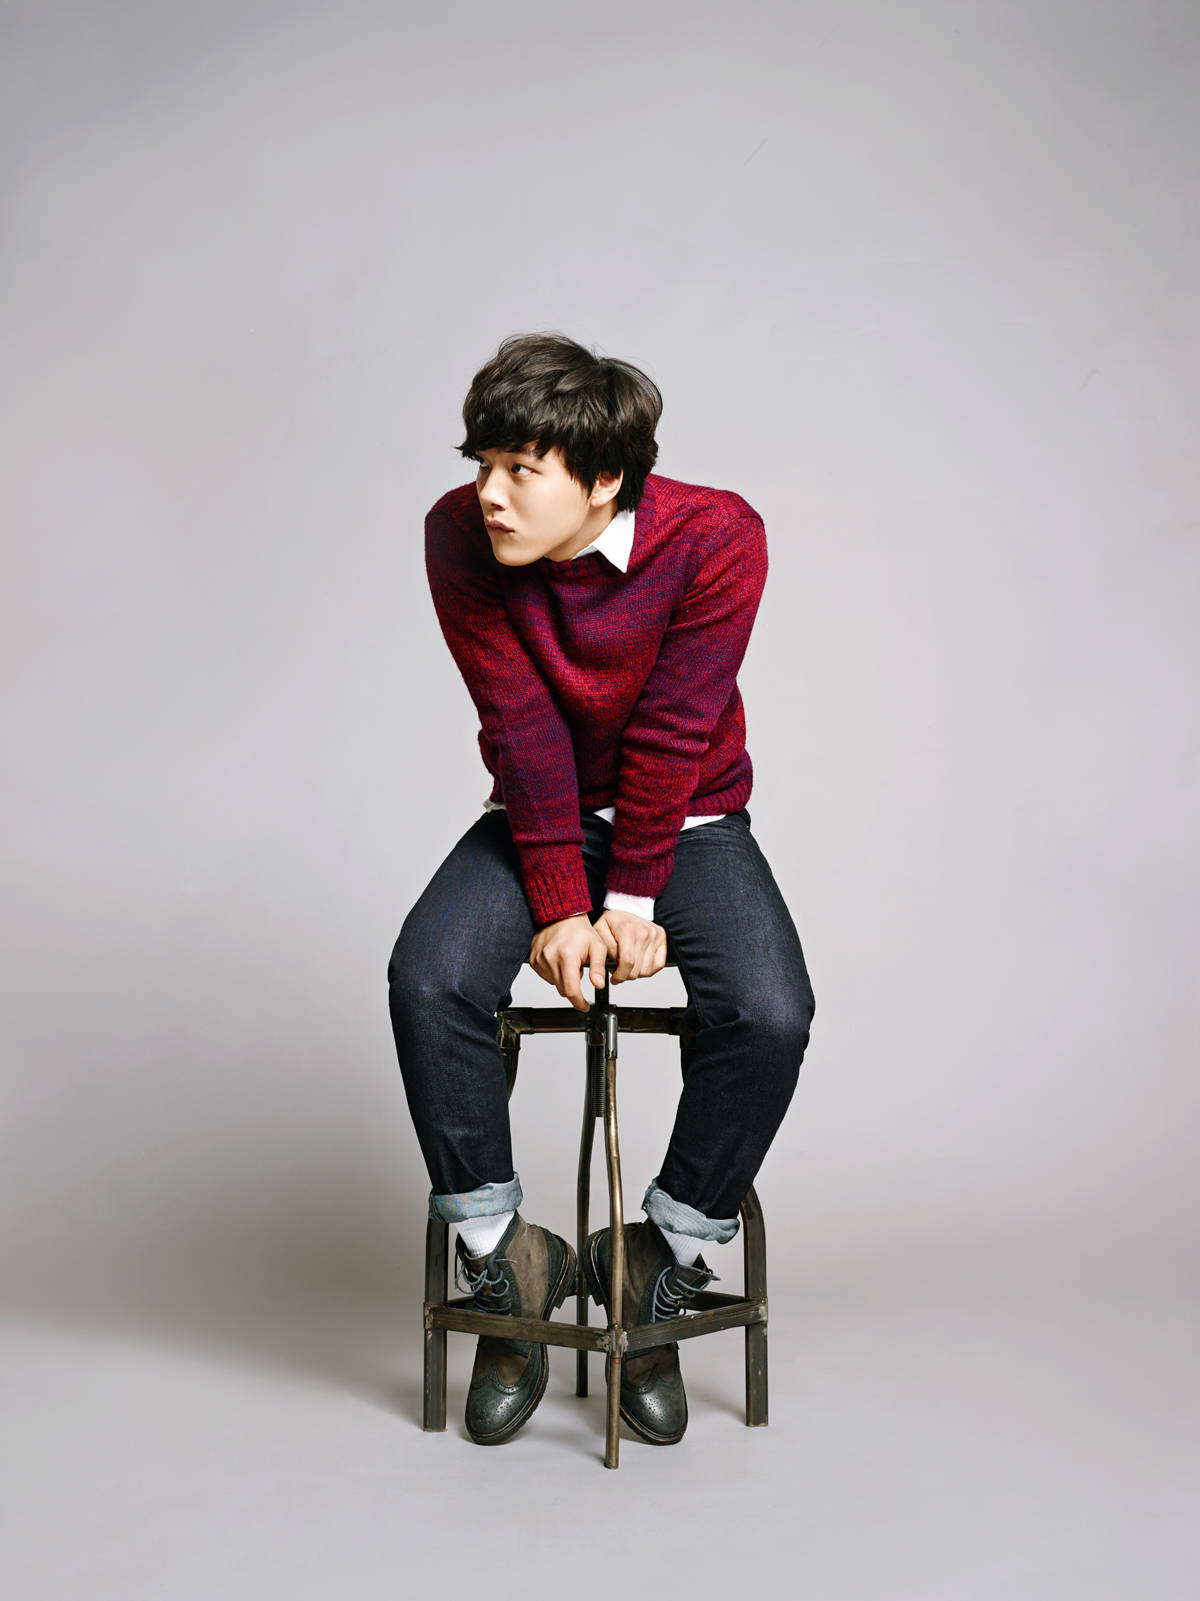 South Korean Actor Yeo Jin Goo Looking Sharp In Red Outfit. Background